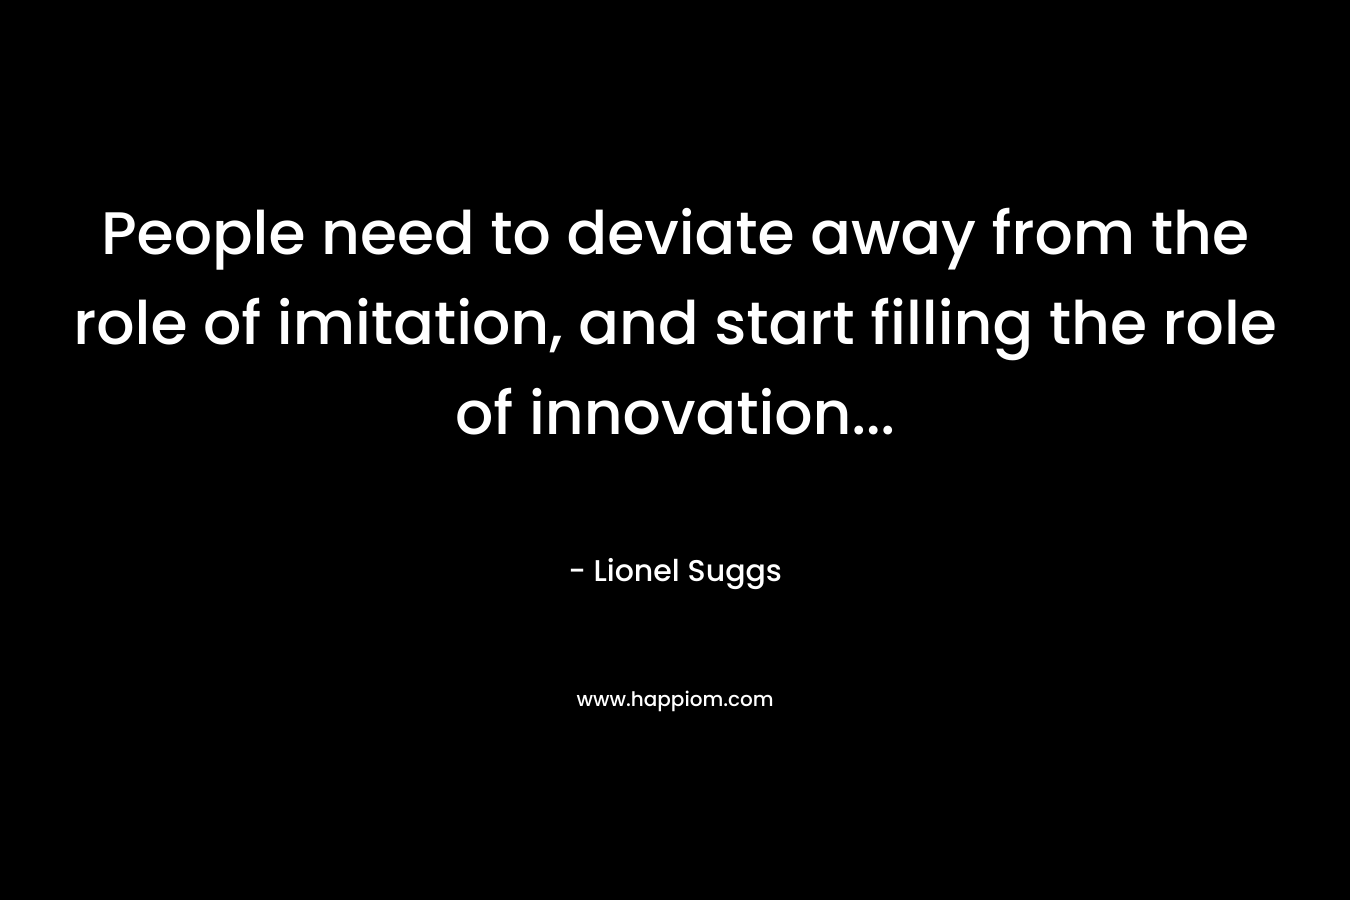 People need to deviate away from the role of imitation, and start filling the role of innovation… – Lionel Suggs